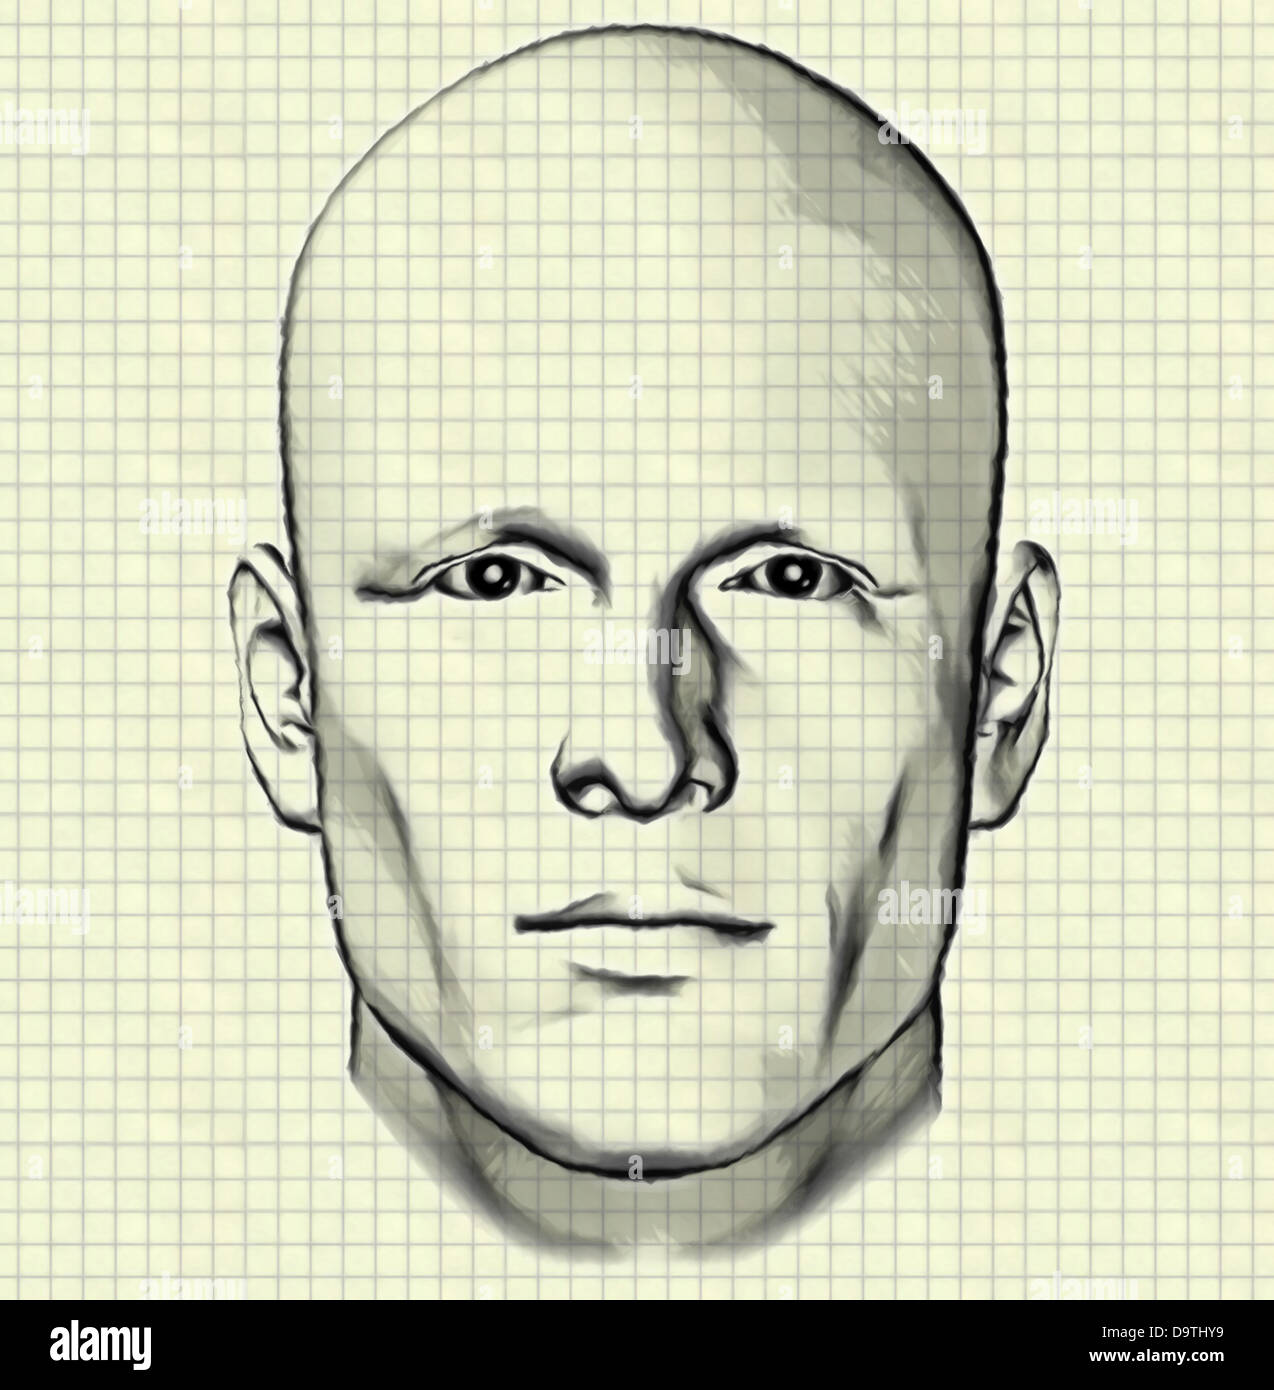 Sketch of male figure portrait drawing of man's head on graph paper  background. Digitally created 3d illustration Stock Photo - Alamy